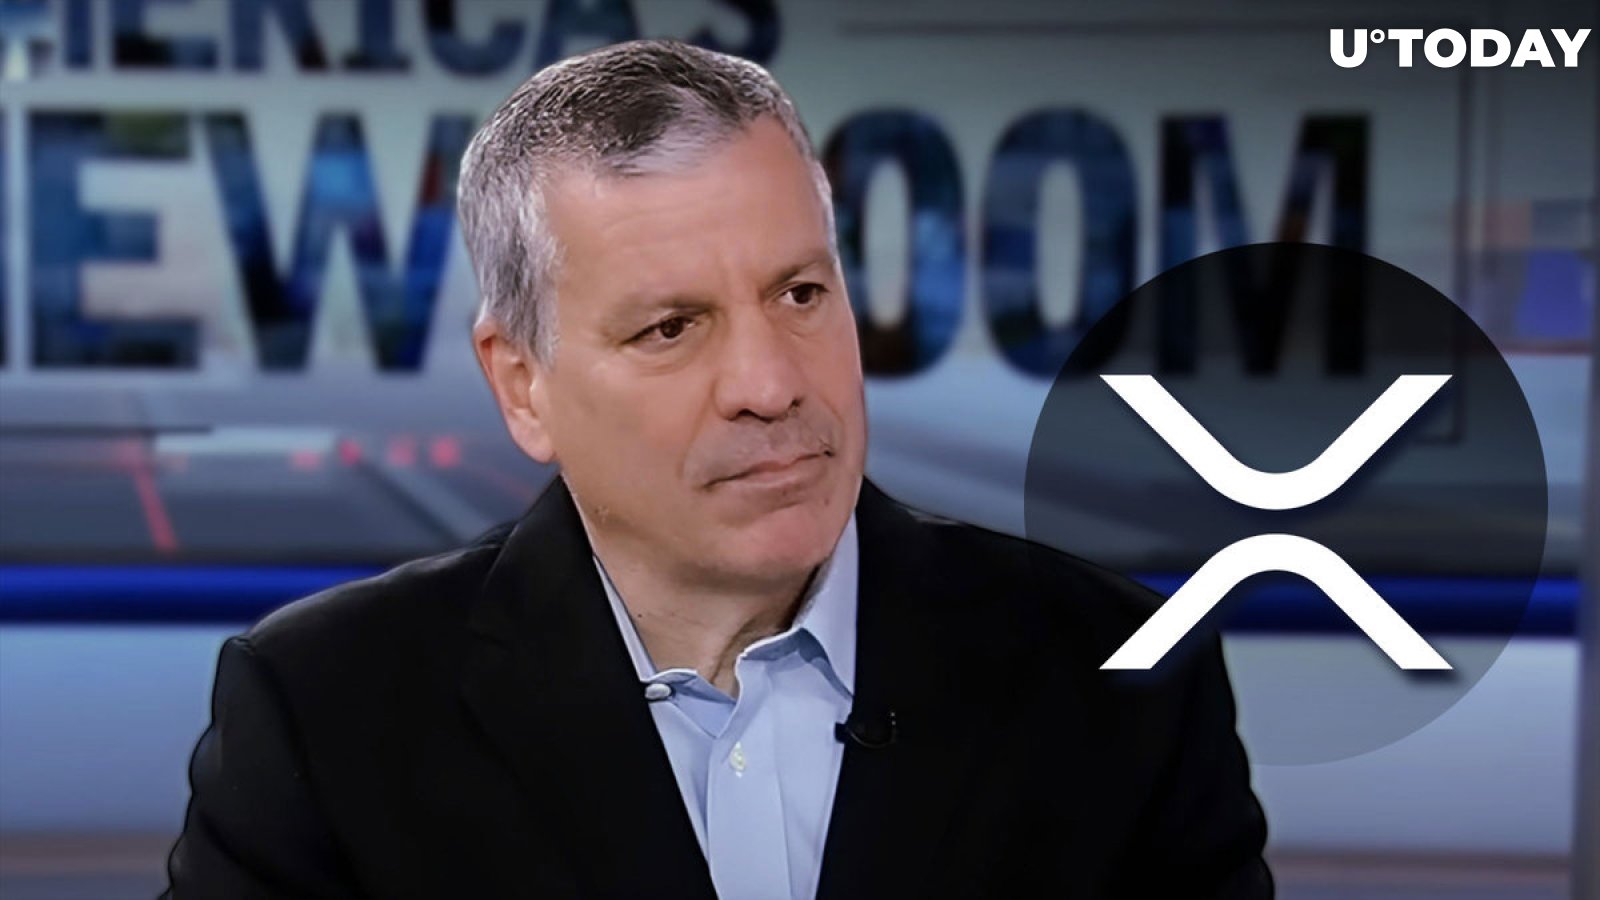 Charles Gasparino Asks 'Serious Question' on XRP's Security Status